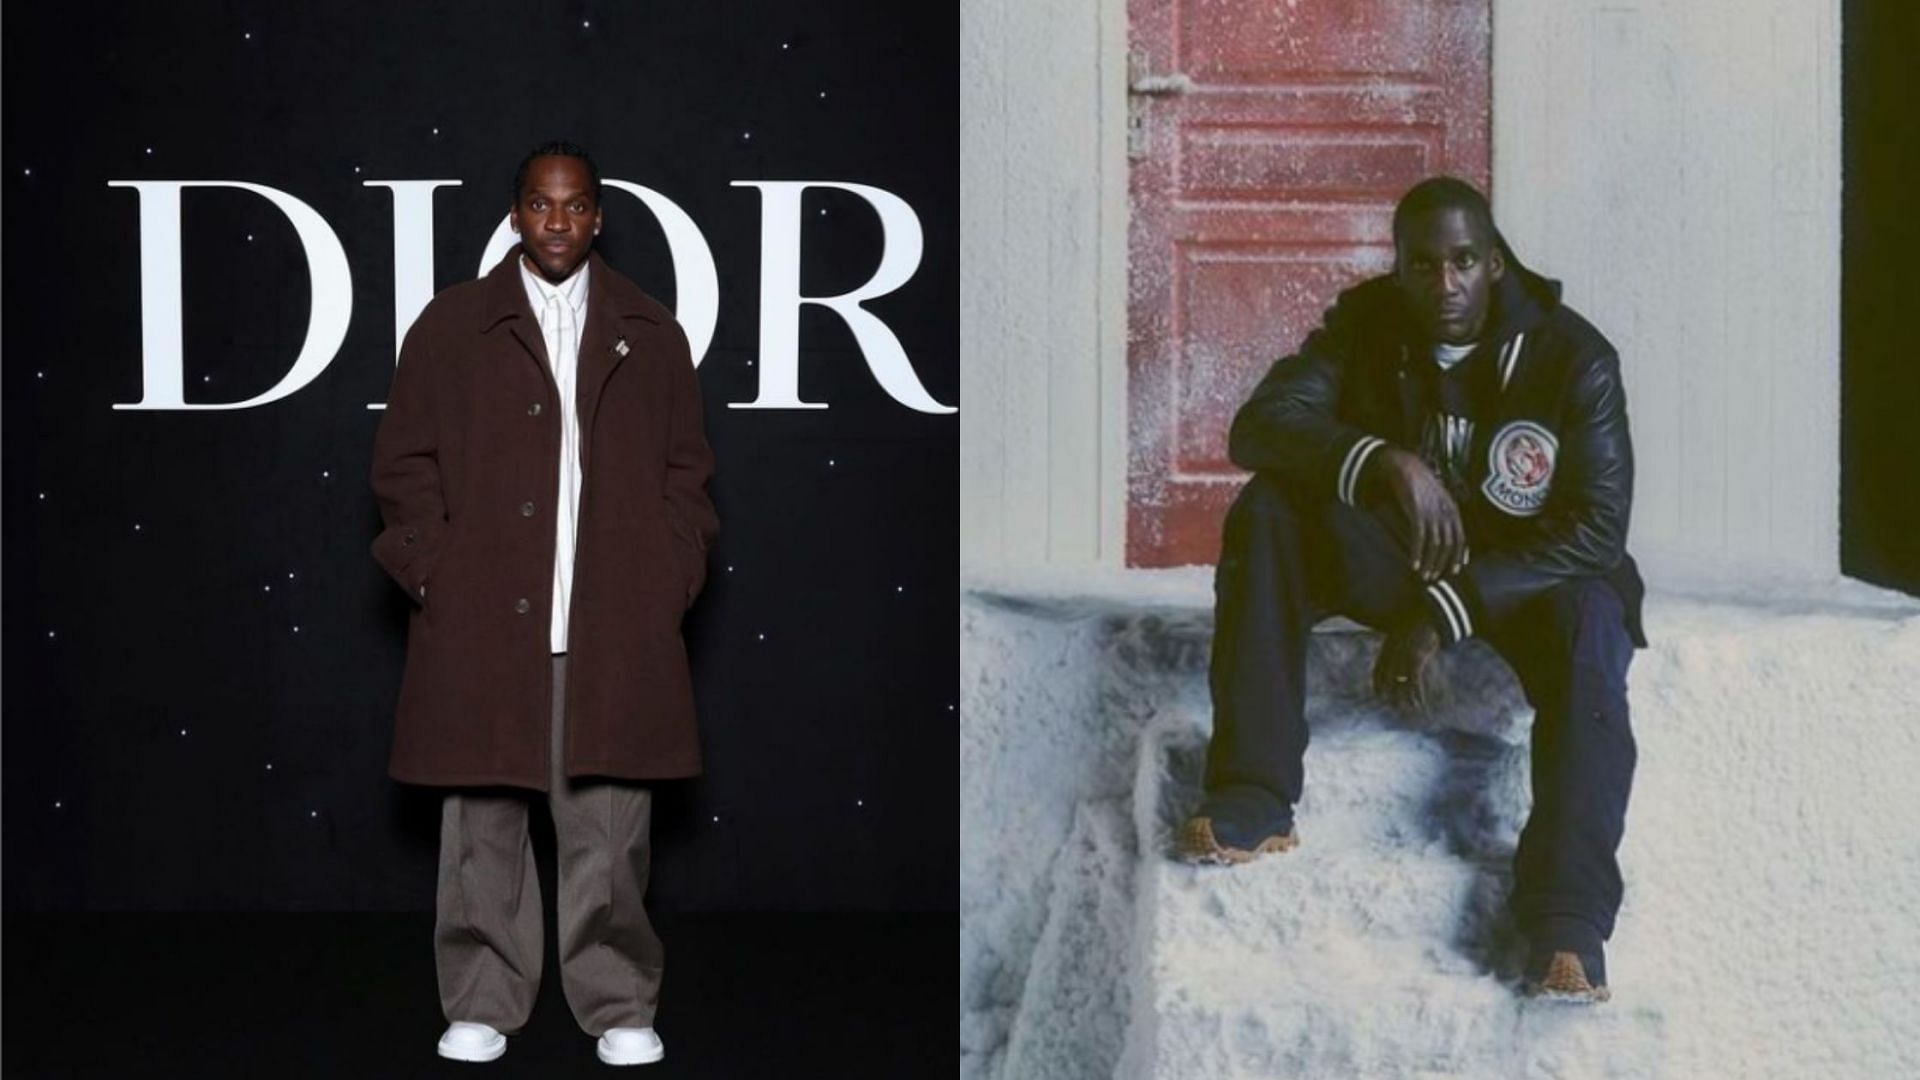  Internet reacts to Pusha T and No Malice carrying purses at Louis Vuitton Paris Fashion Week show (Image via Instagram/@malice @kingpush)